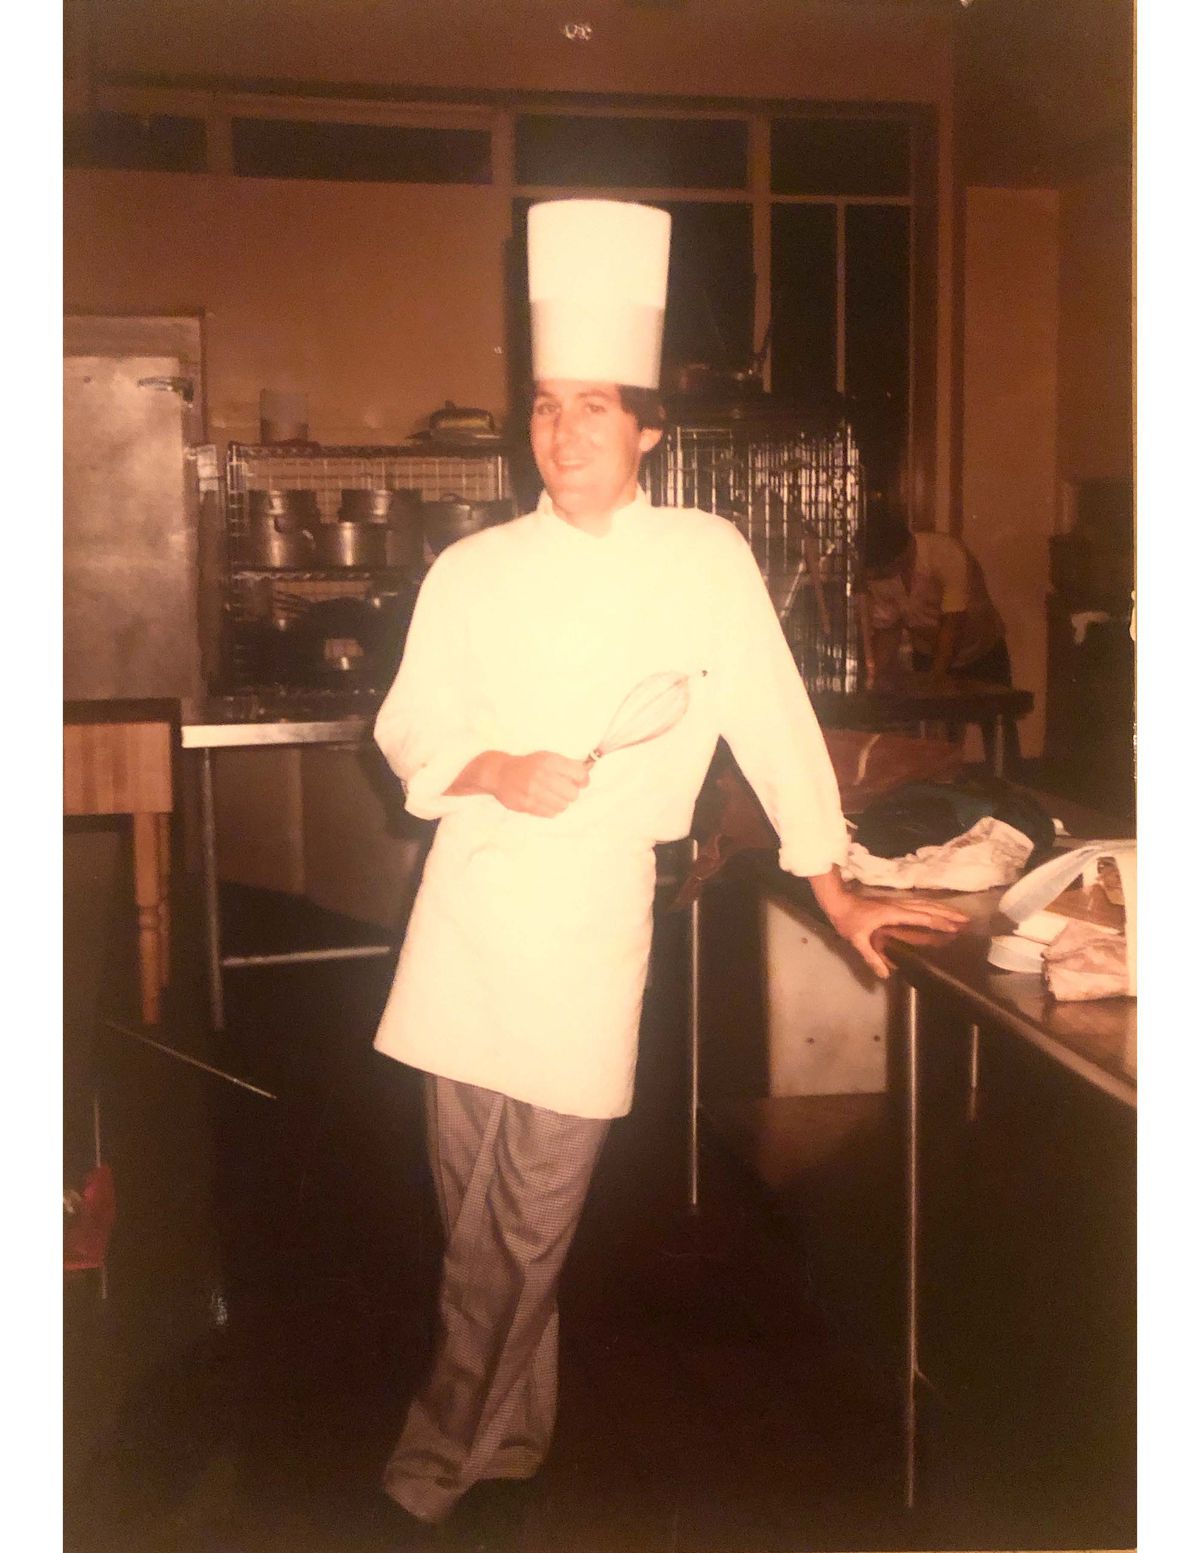 A photo of young Charlie Trotter during his time in San Francisco (1983-1984) when he had a brief, six-week stint at the California Culinary Academy. While in San Francisco, Trotter also worked at Cafe Bedford, Le Méridien, and Campton Place Restaurant (now Taj Campton Place Hotel) under Bradley Ogden.&nbsp;Photo courtesy of Lisa Ehrlich